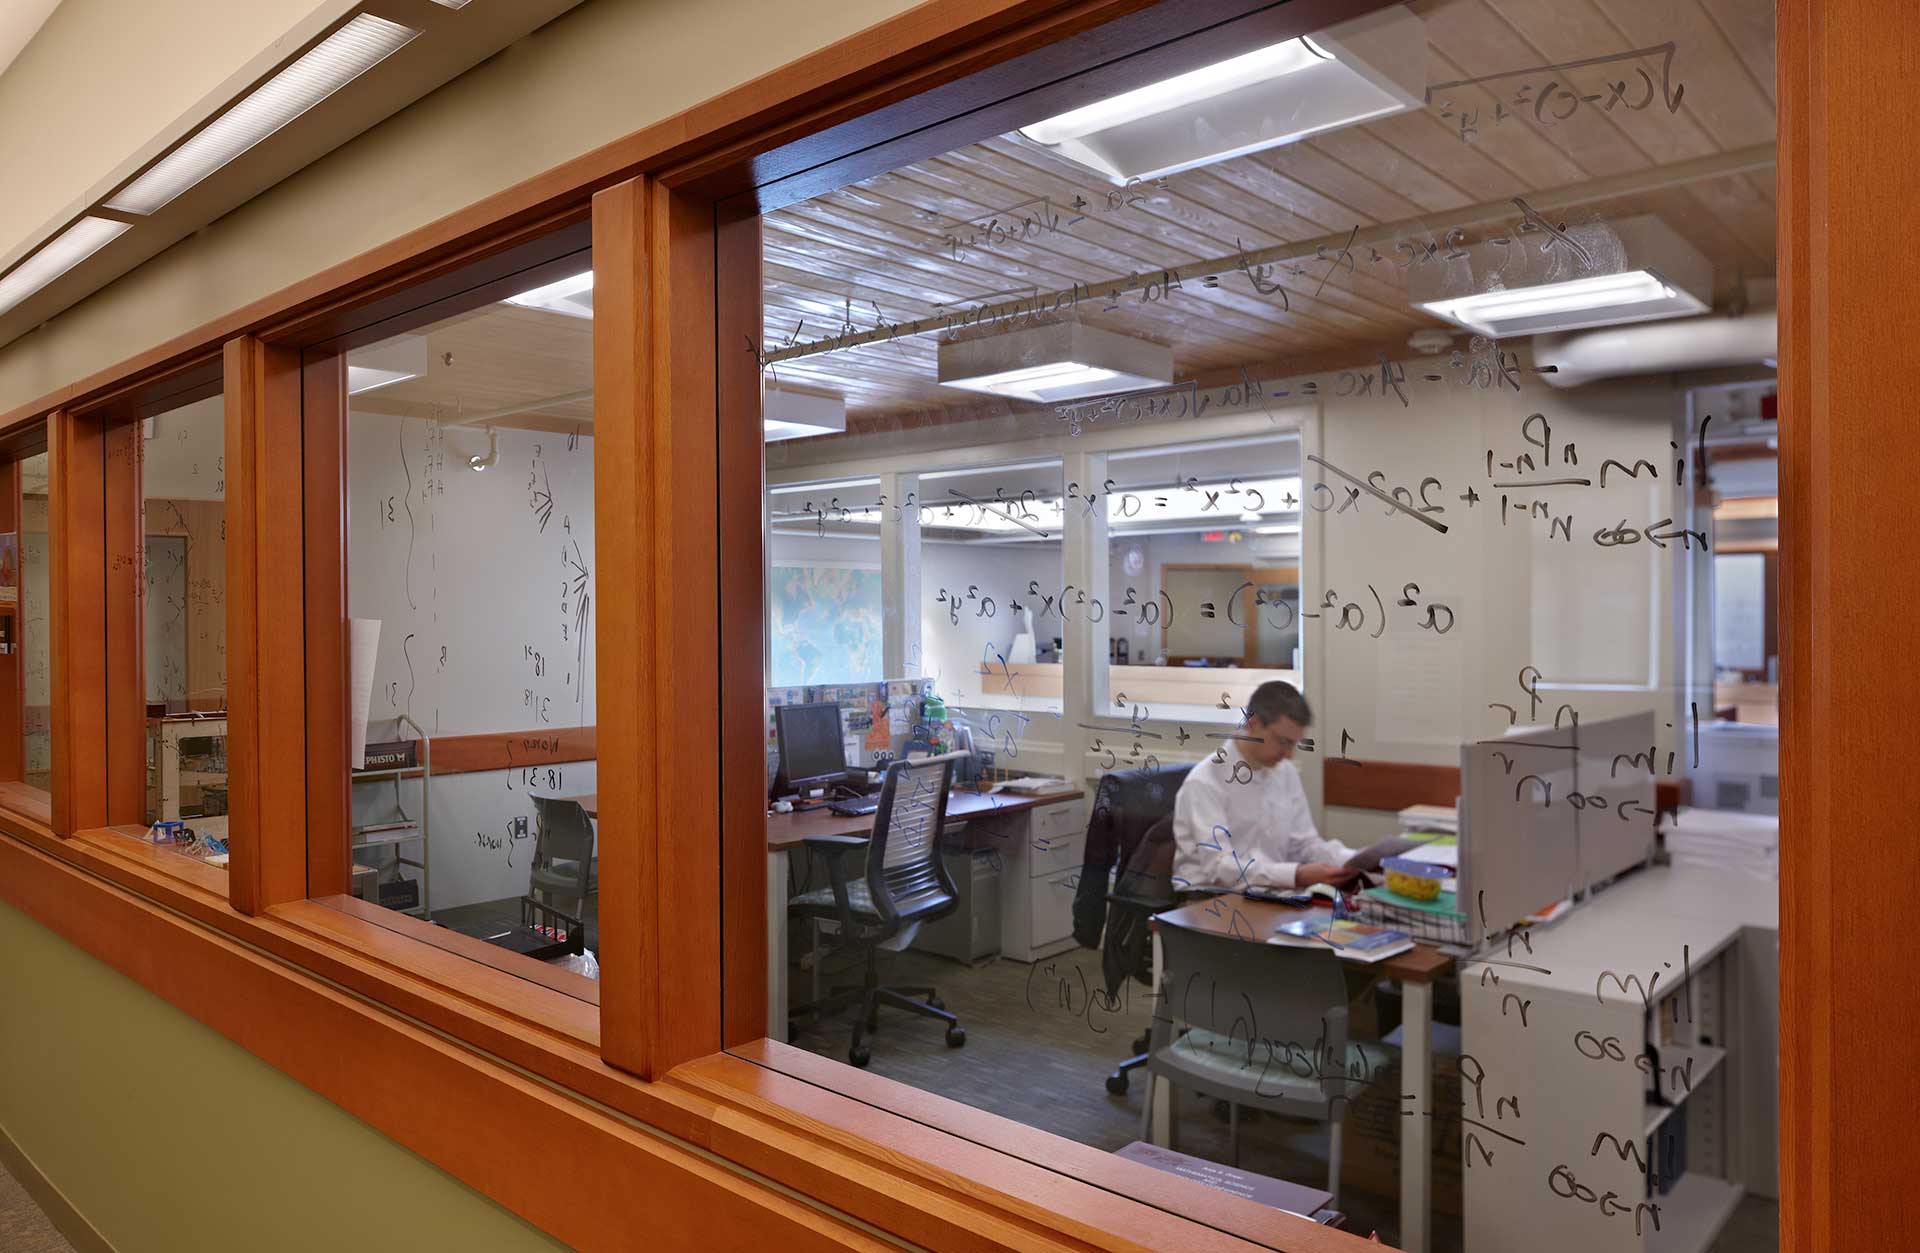 Lakeside School Allen Athletics Center office with equations written on window